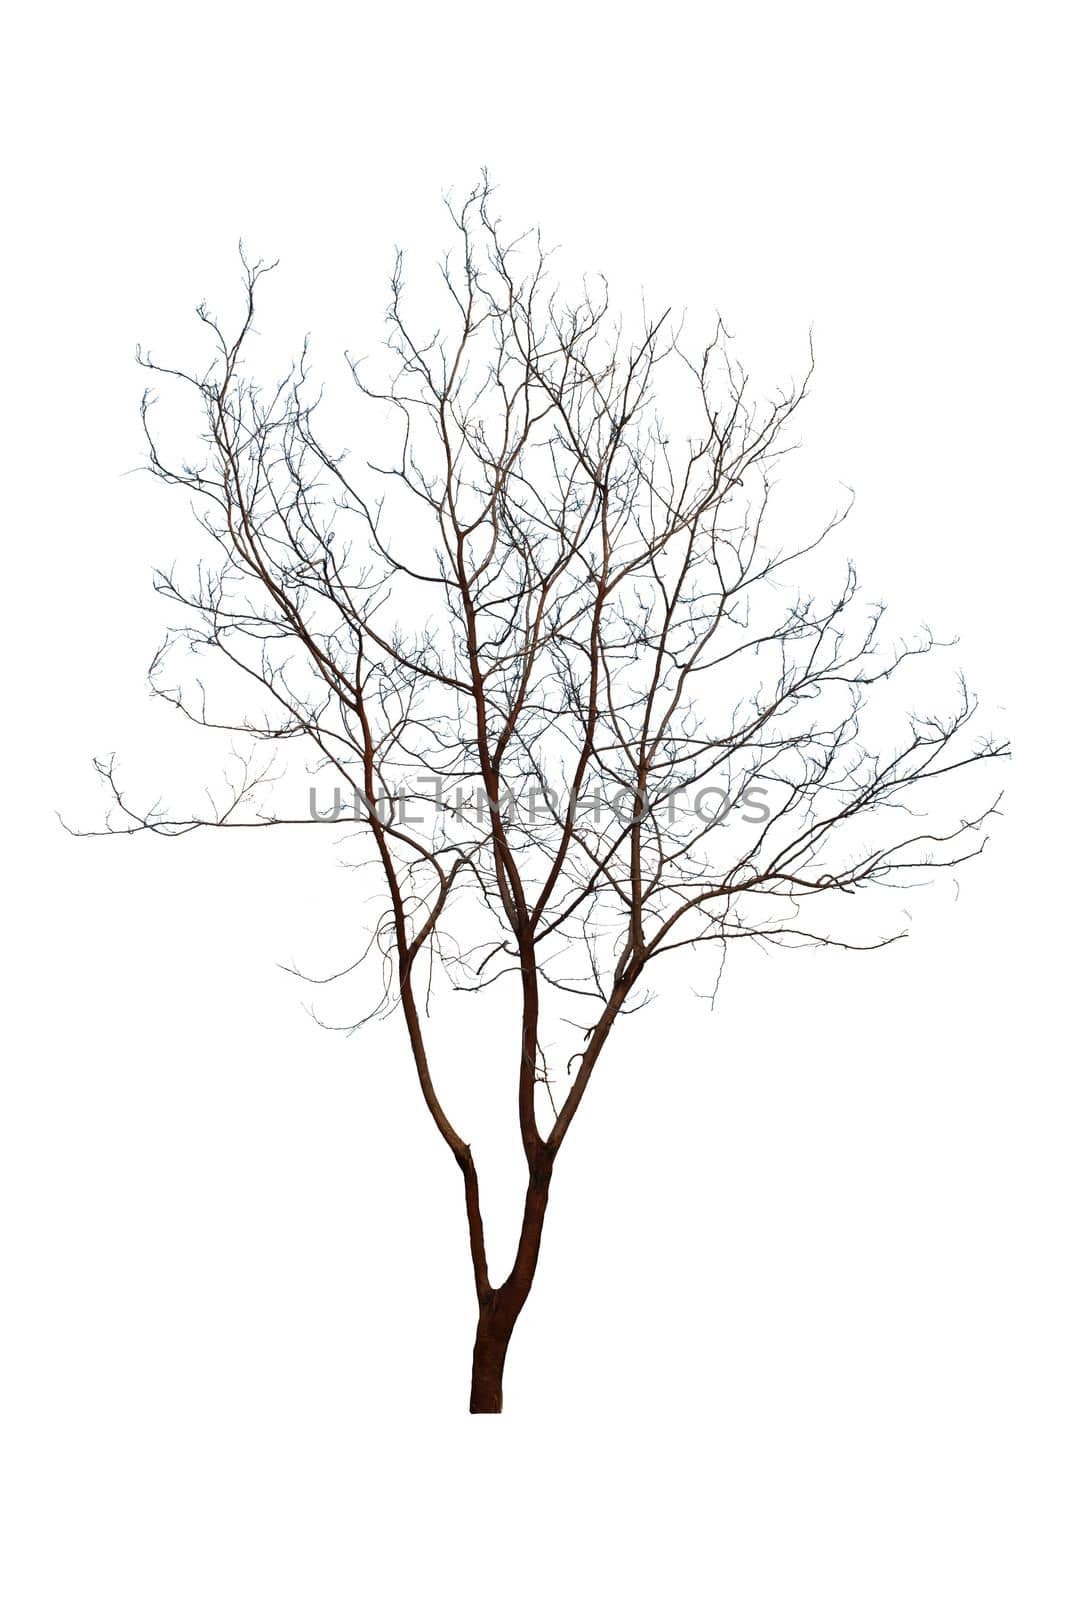 dead tree isolated on white background by rakoptonLPN